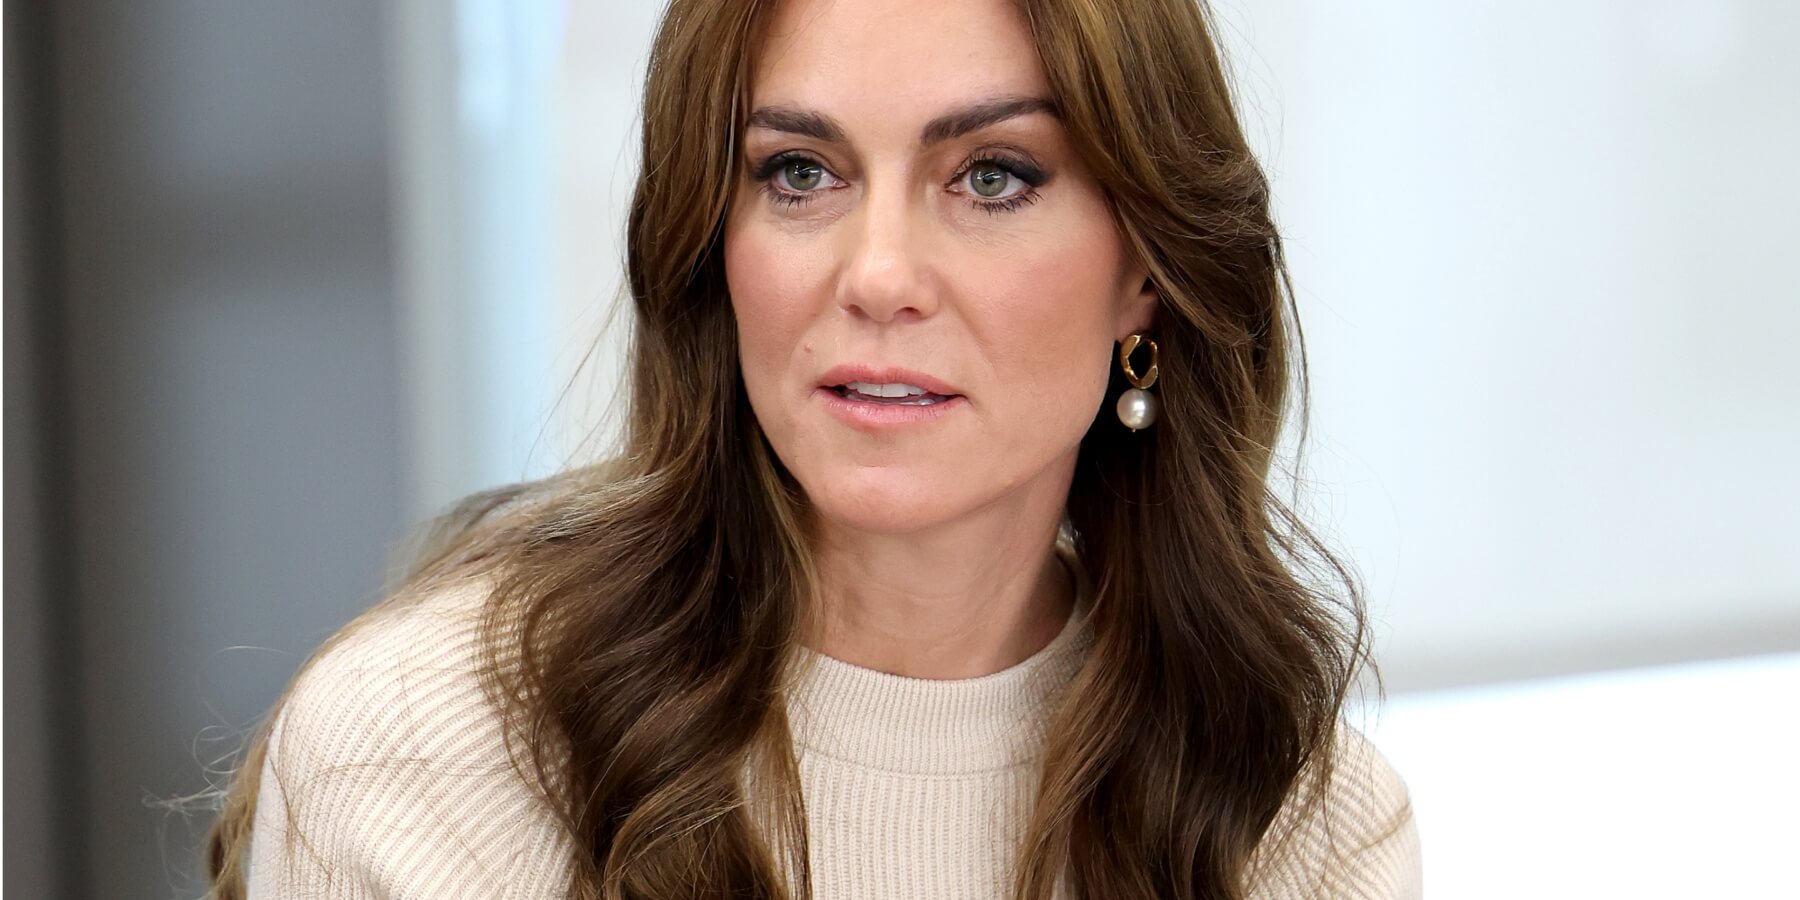 Kate Middleton in a ‘Fragile Mental and Physical State’: Royal Reporter